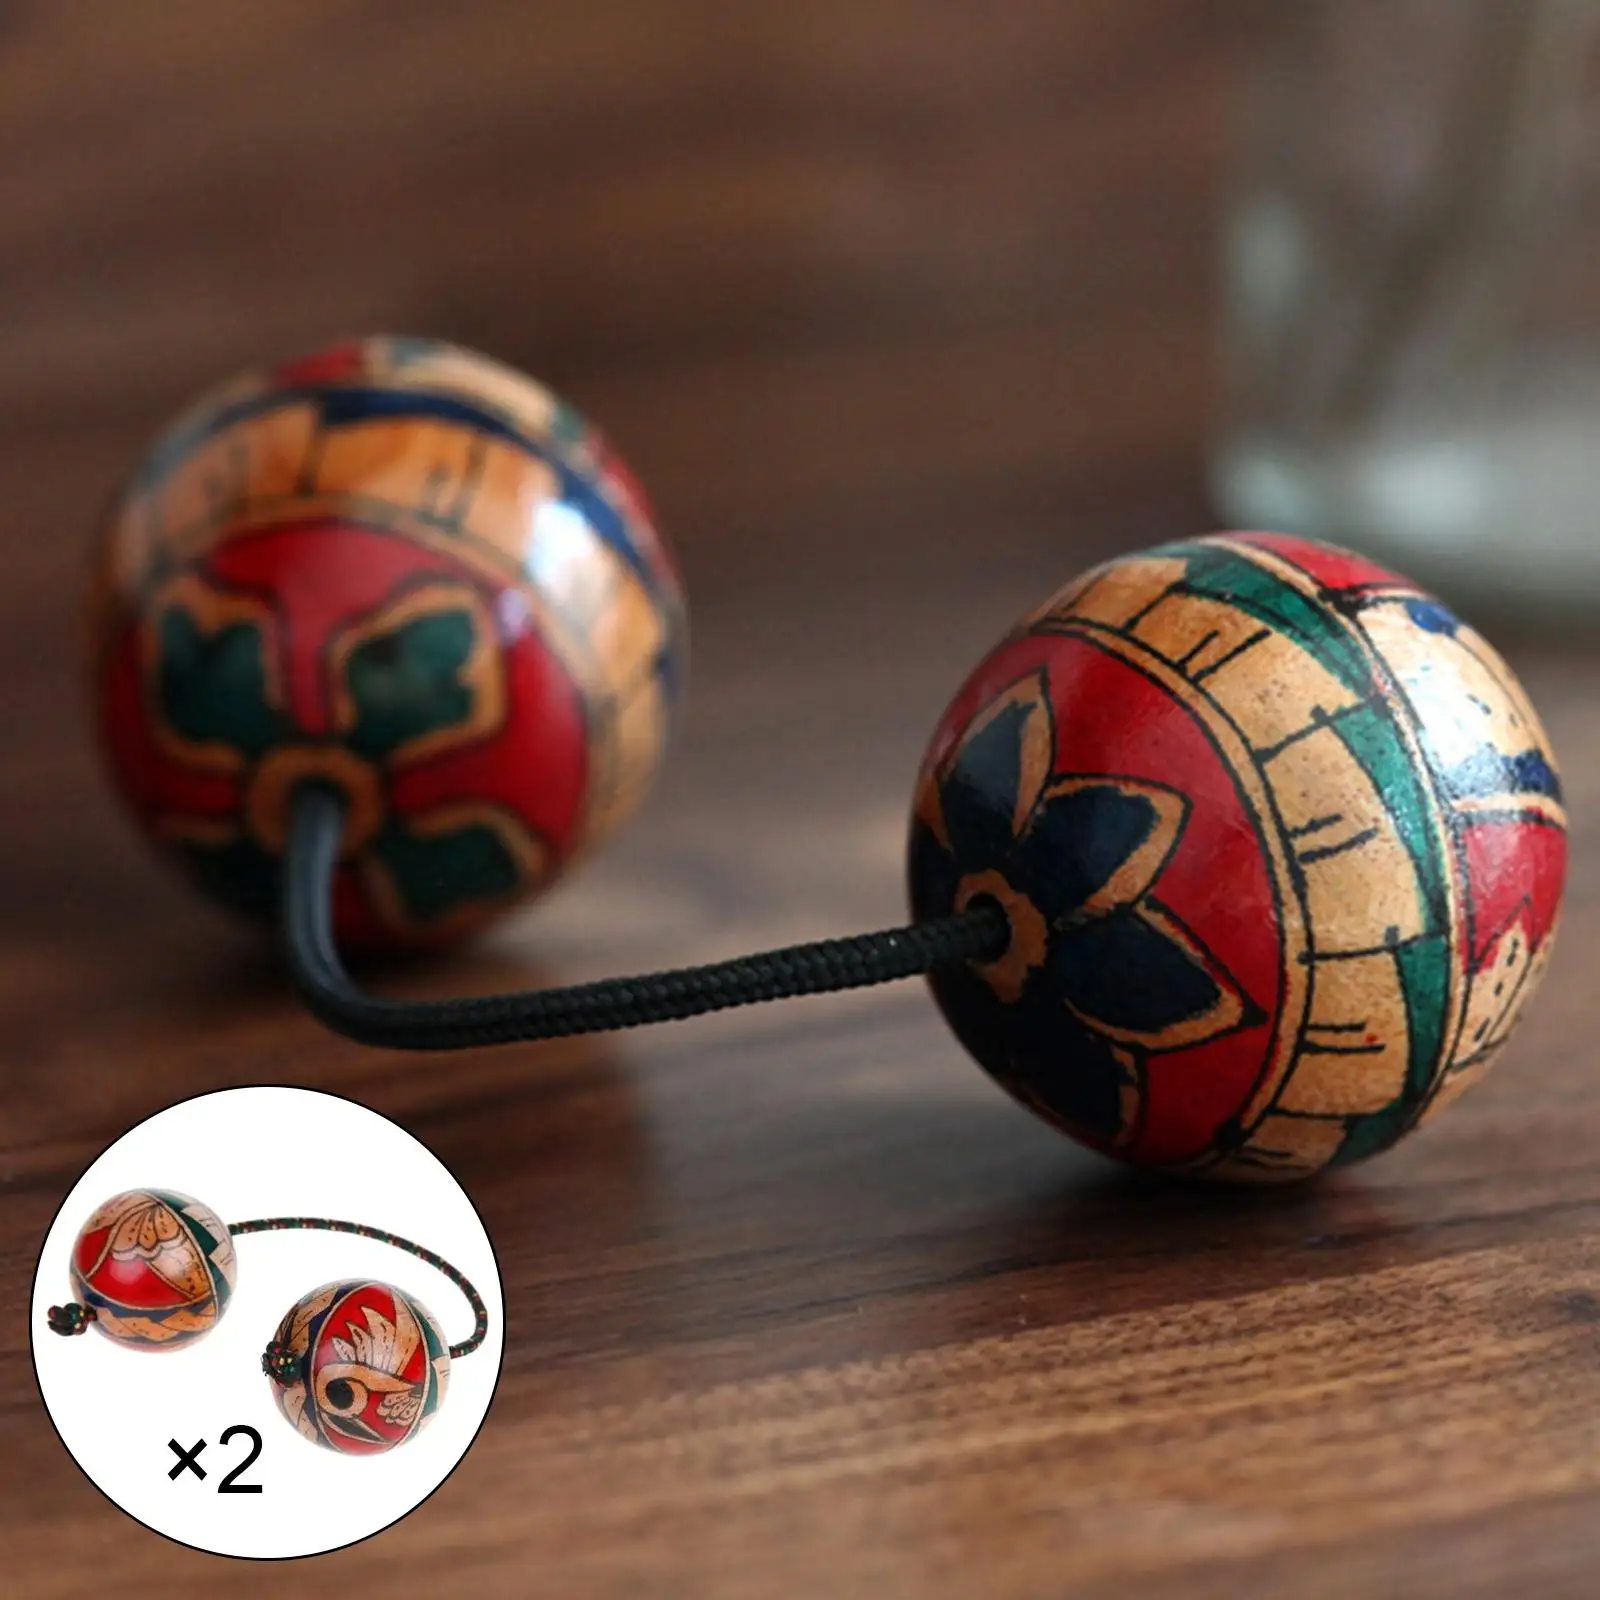 Rhythmic Sand Ball Music Instrument Music Egg Shaker Party Favors African Shaker Rattle for Summer, Holiday Party, Holiday Gifts